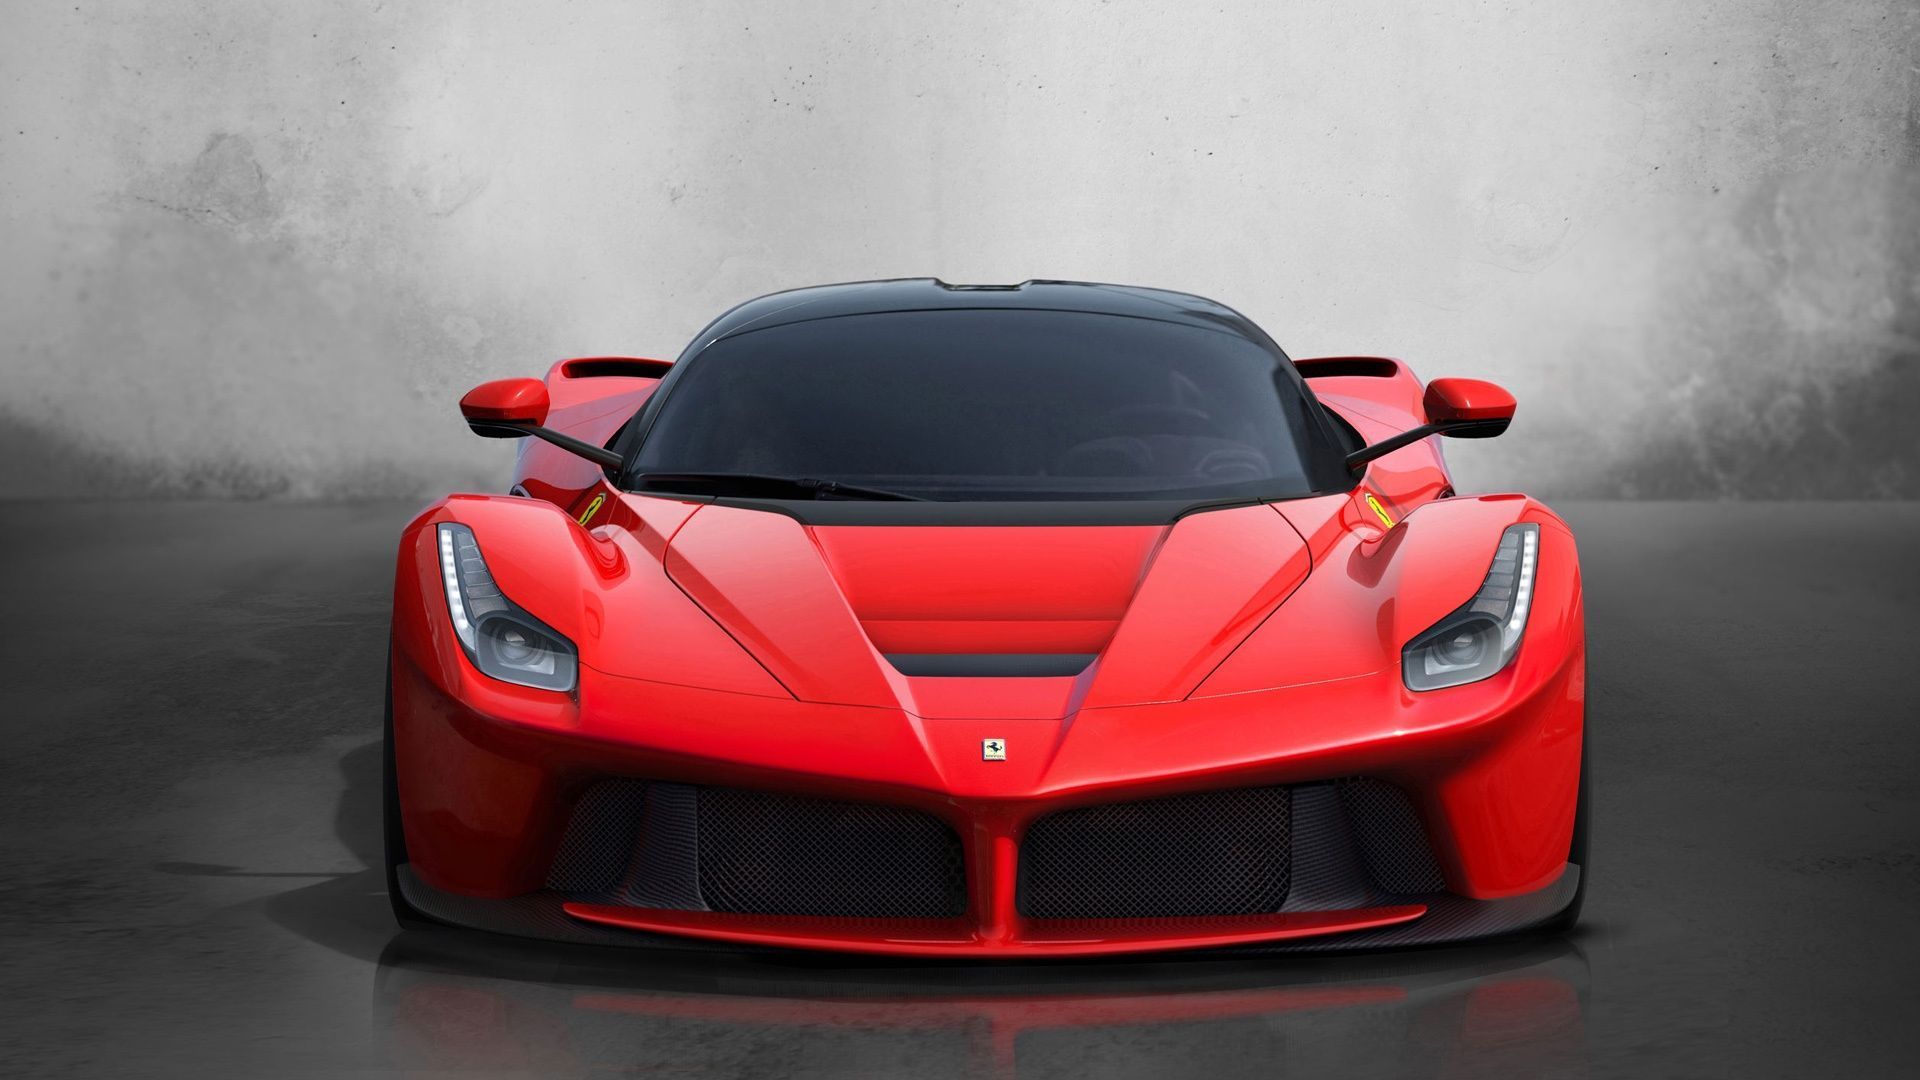 2014 ferrari red couloured most beautiful and latest Car Wallpaper hd 1080p free download 2014